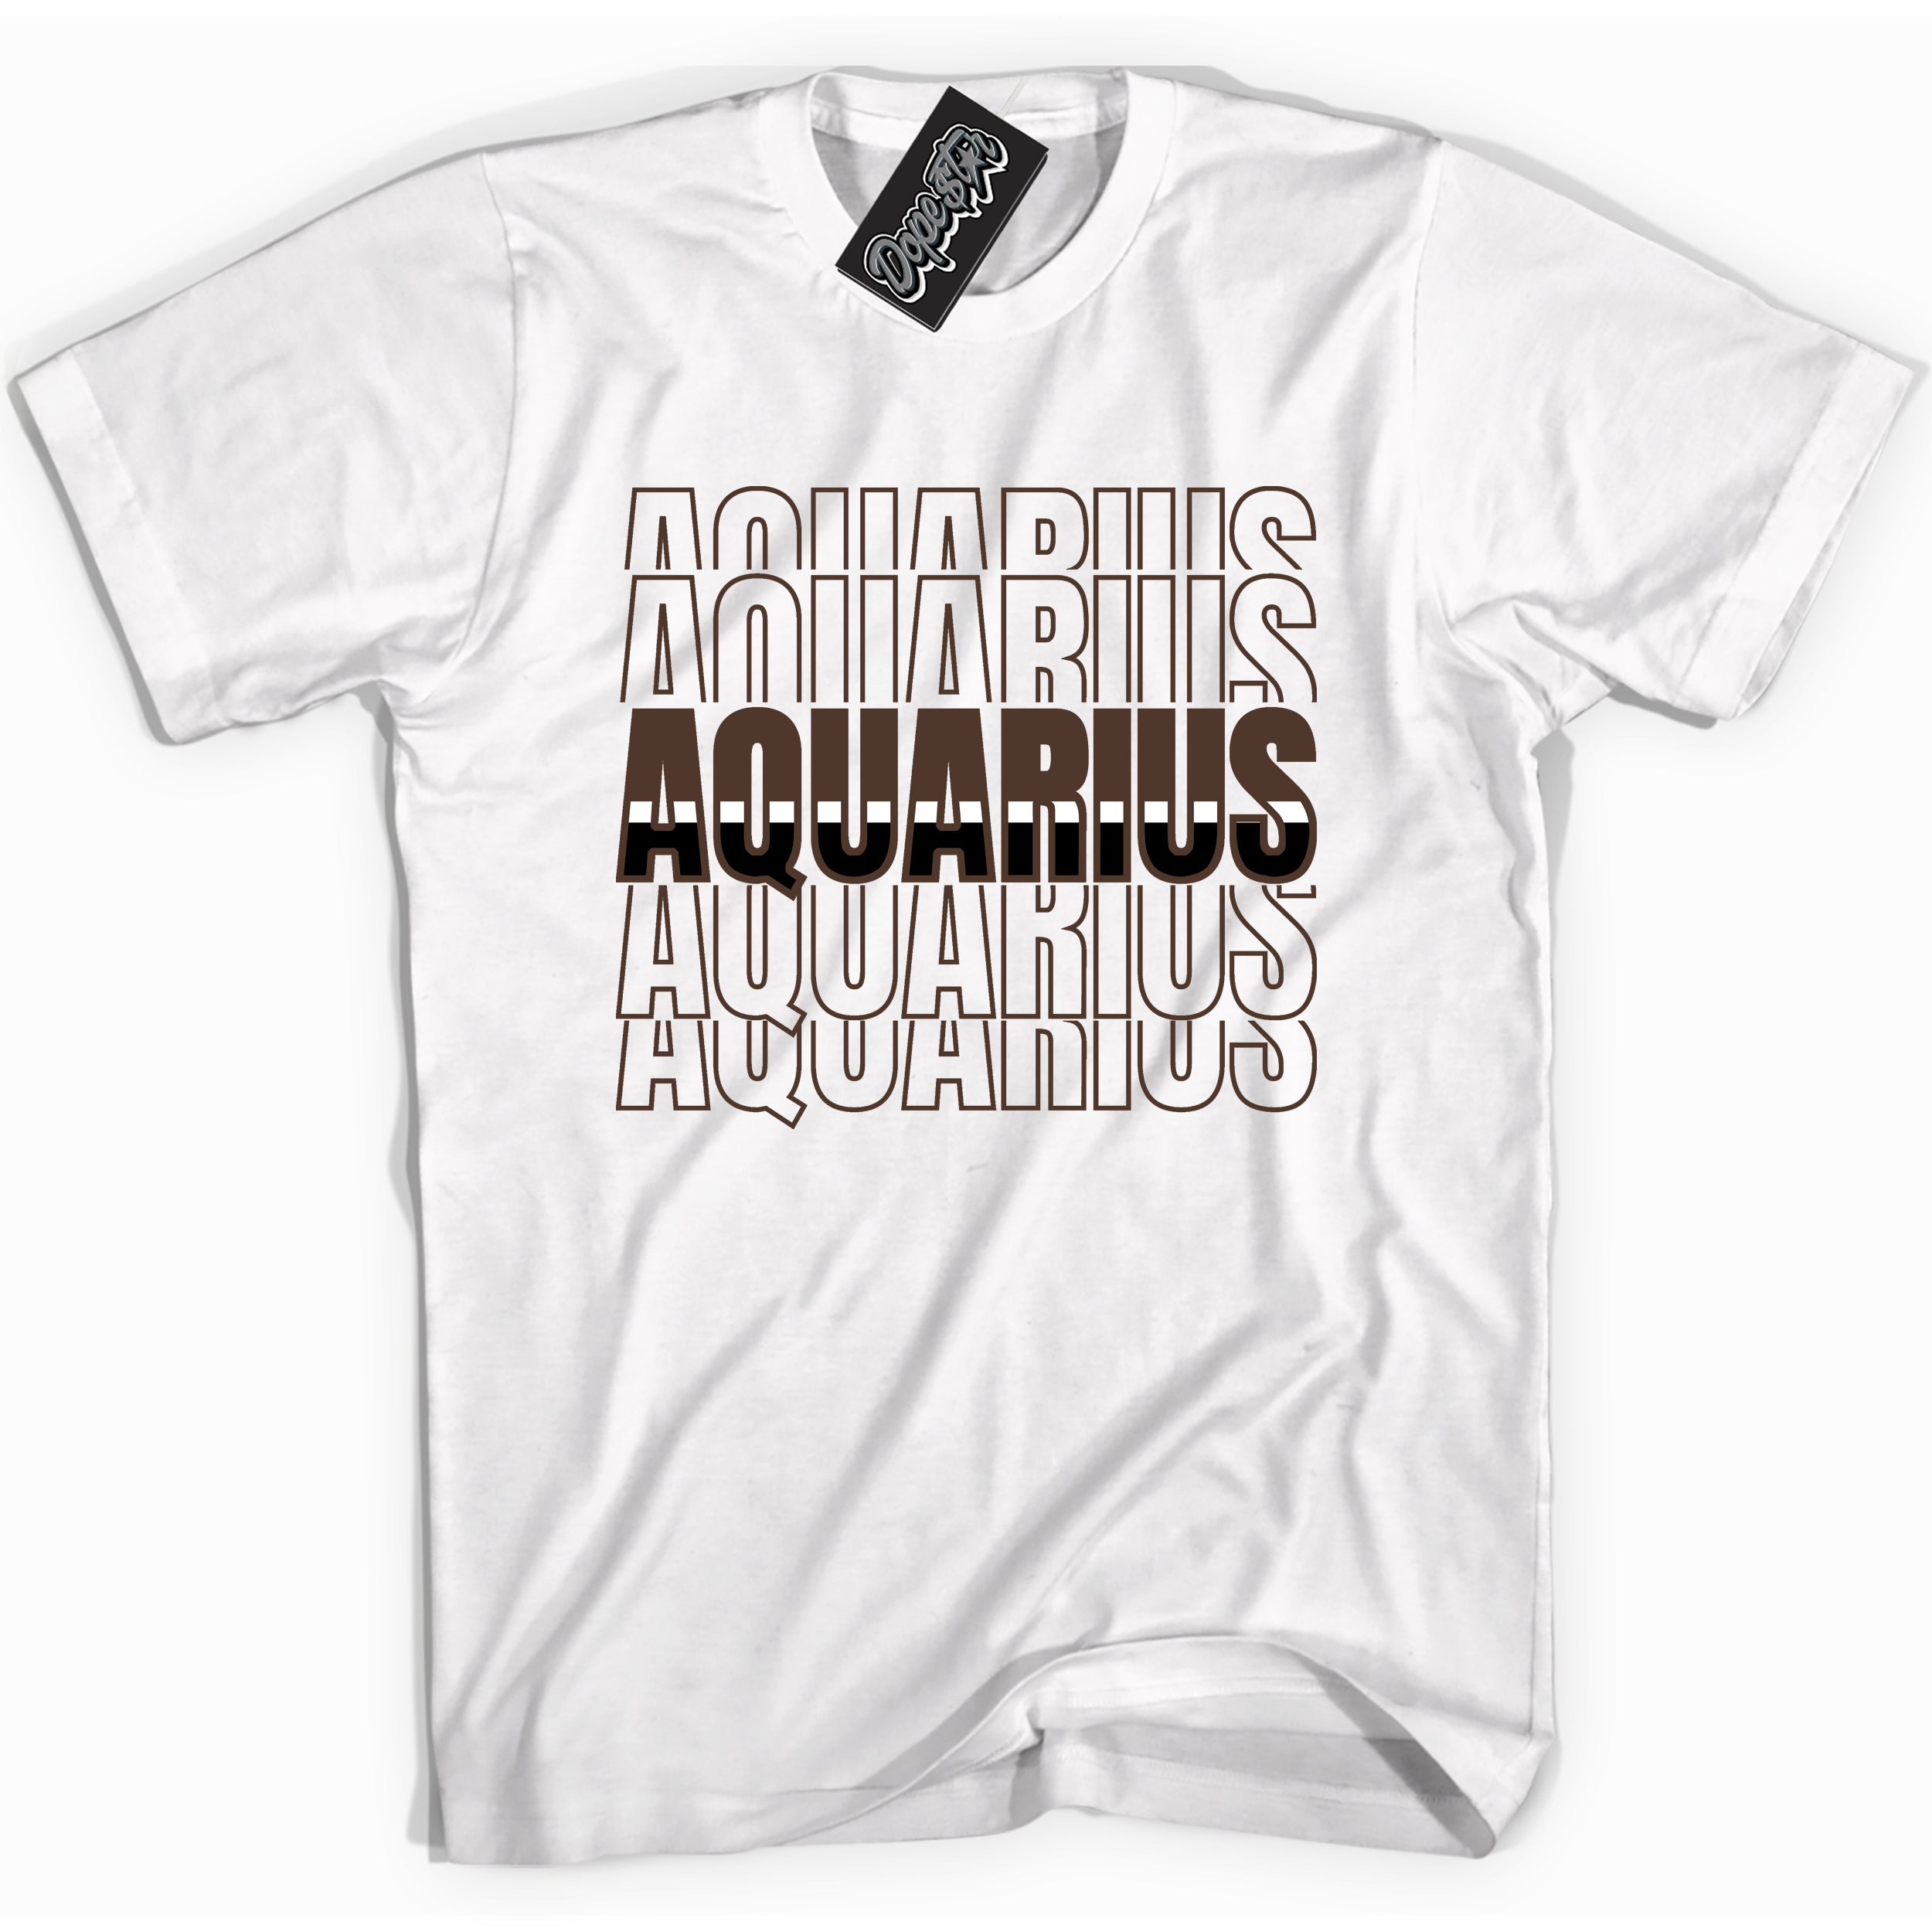 Cool White graphic tee with “ Aquarius ” design, that perfectly matches Palomino 1s sneakers 